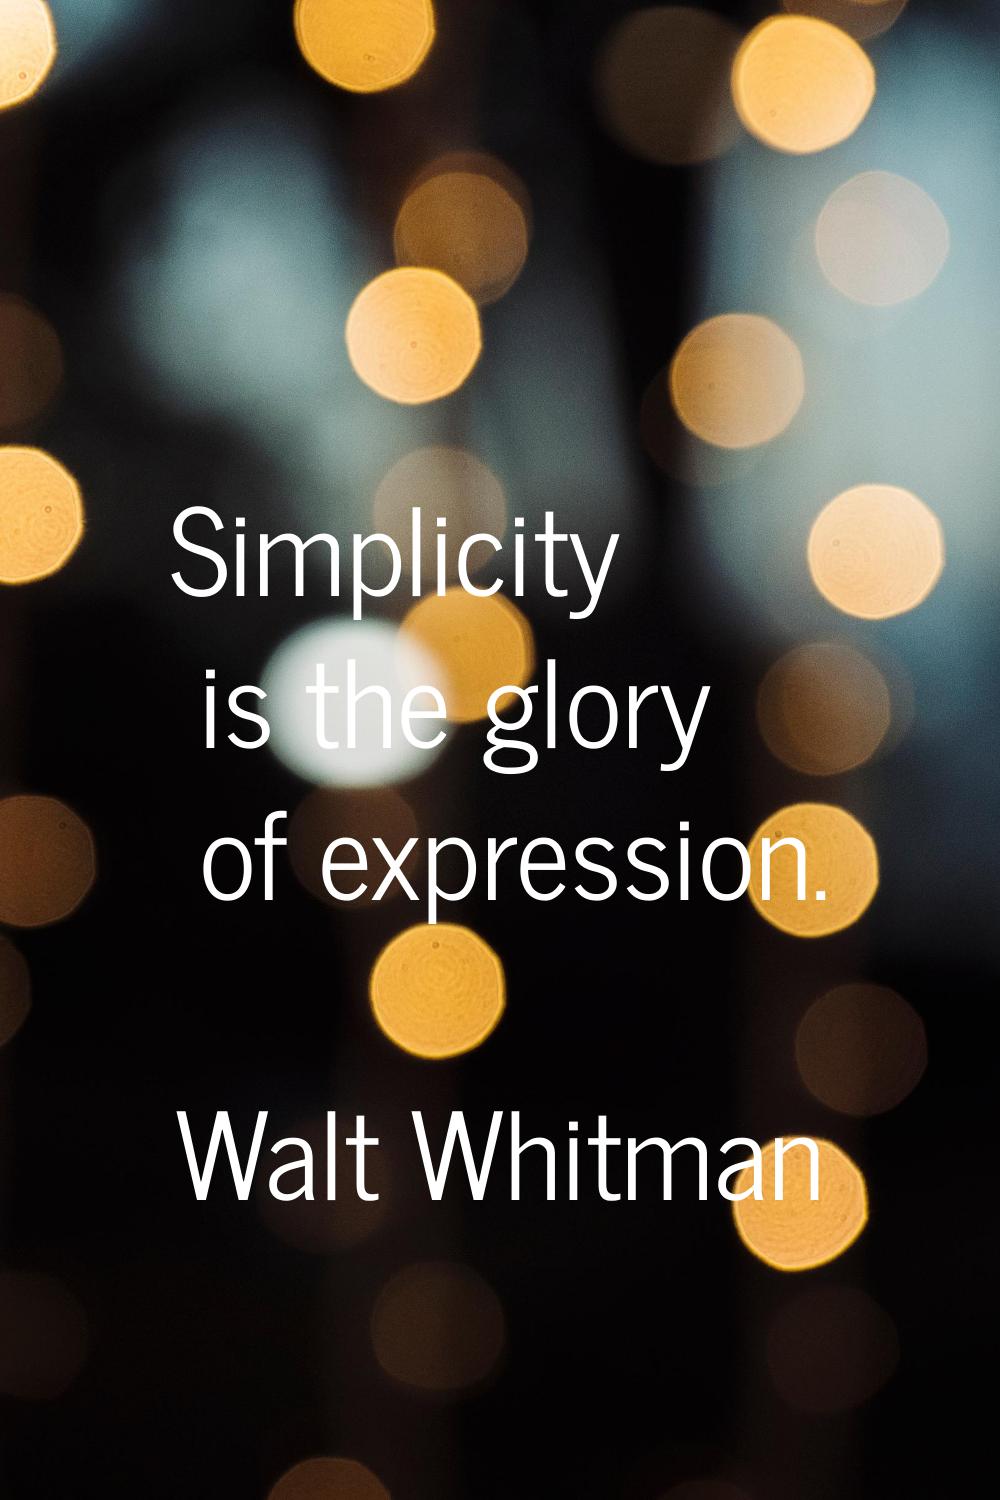 Simplicity is the glory of expression.